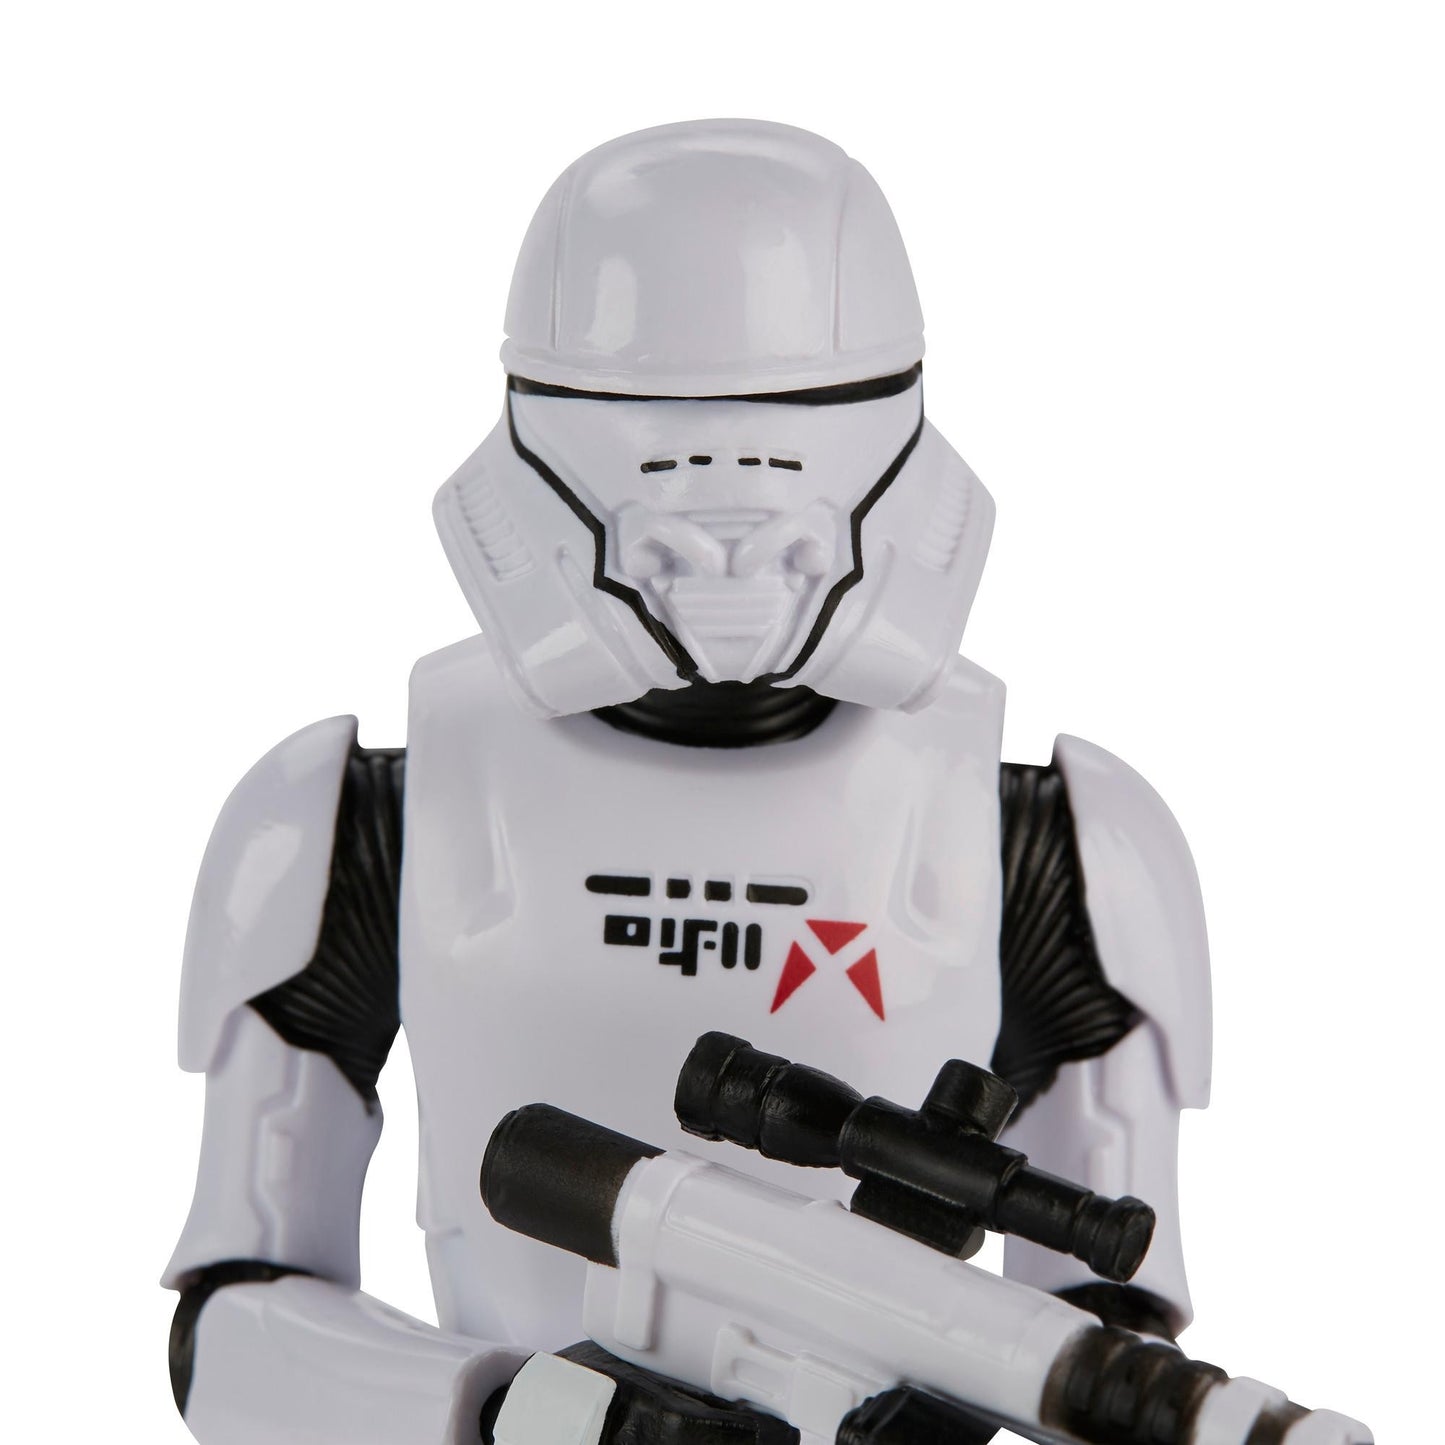 Star Wars Galaxy of Adventures Jet Trooper 5-Inch-Scale Action Figure Toy